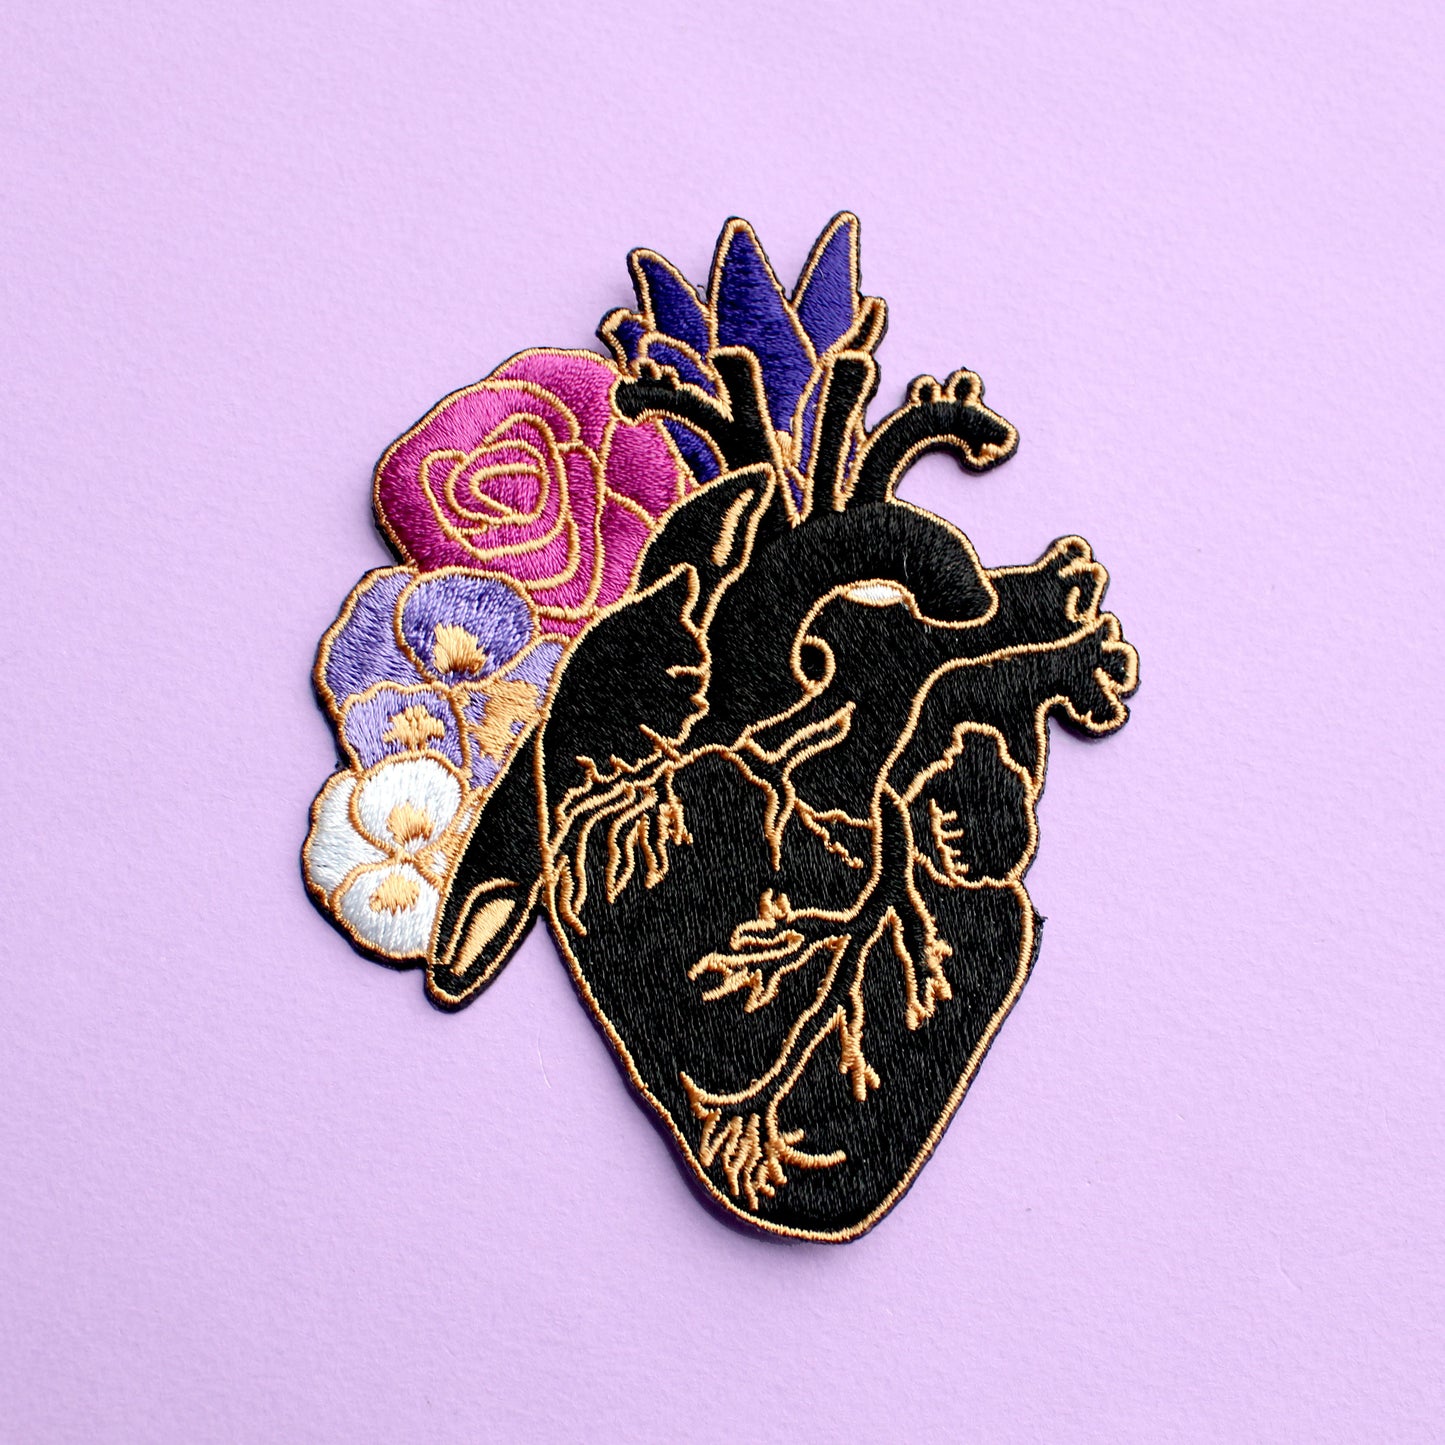 Anatomical Heart Iron-on patch